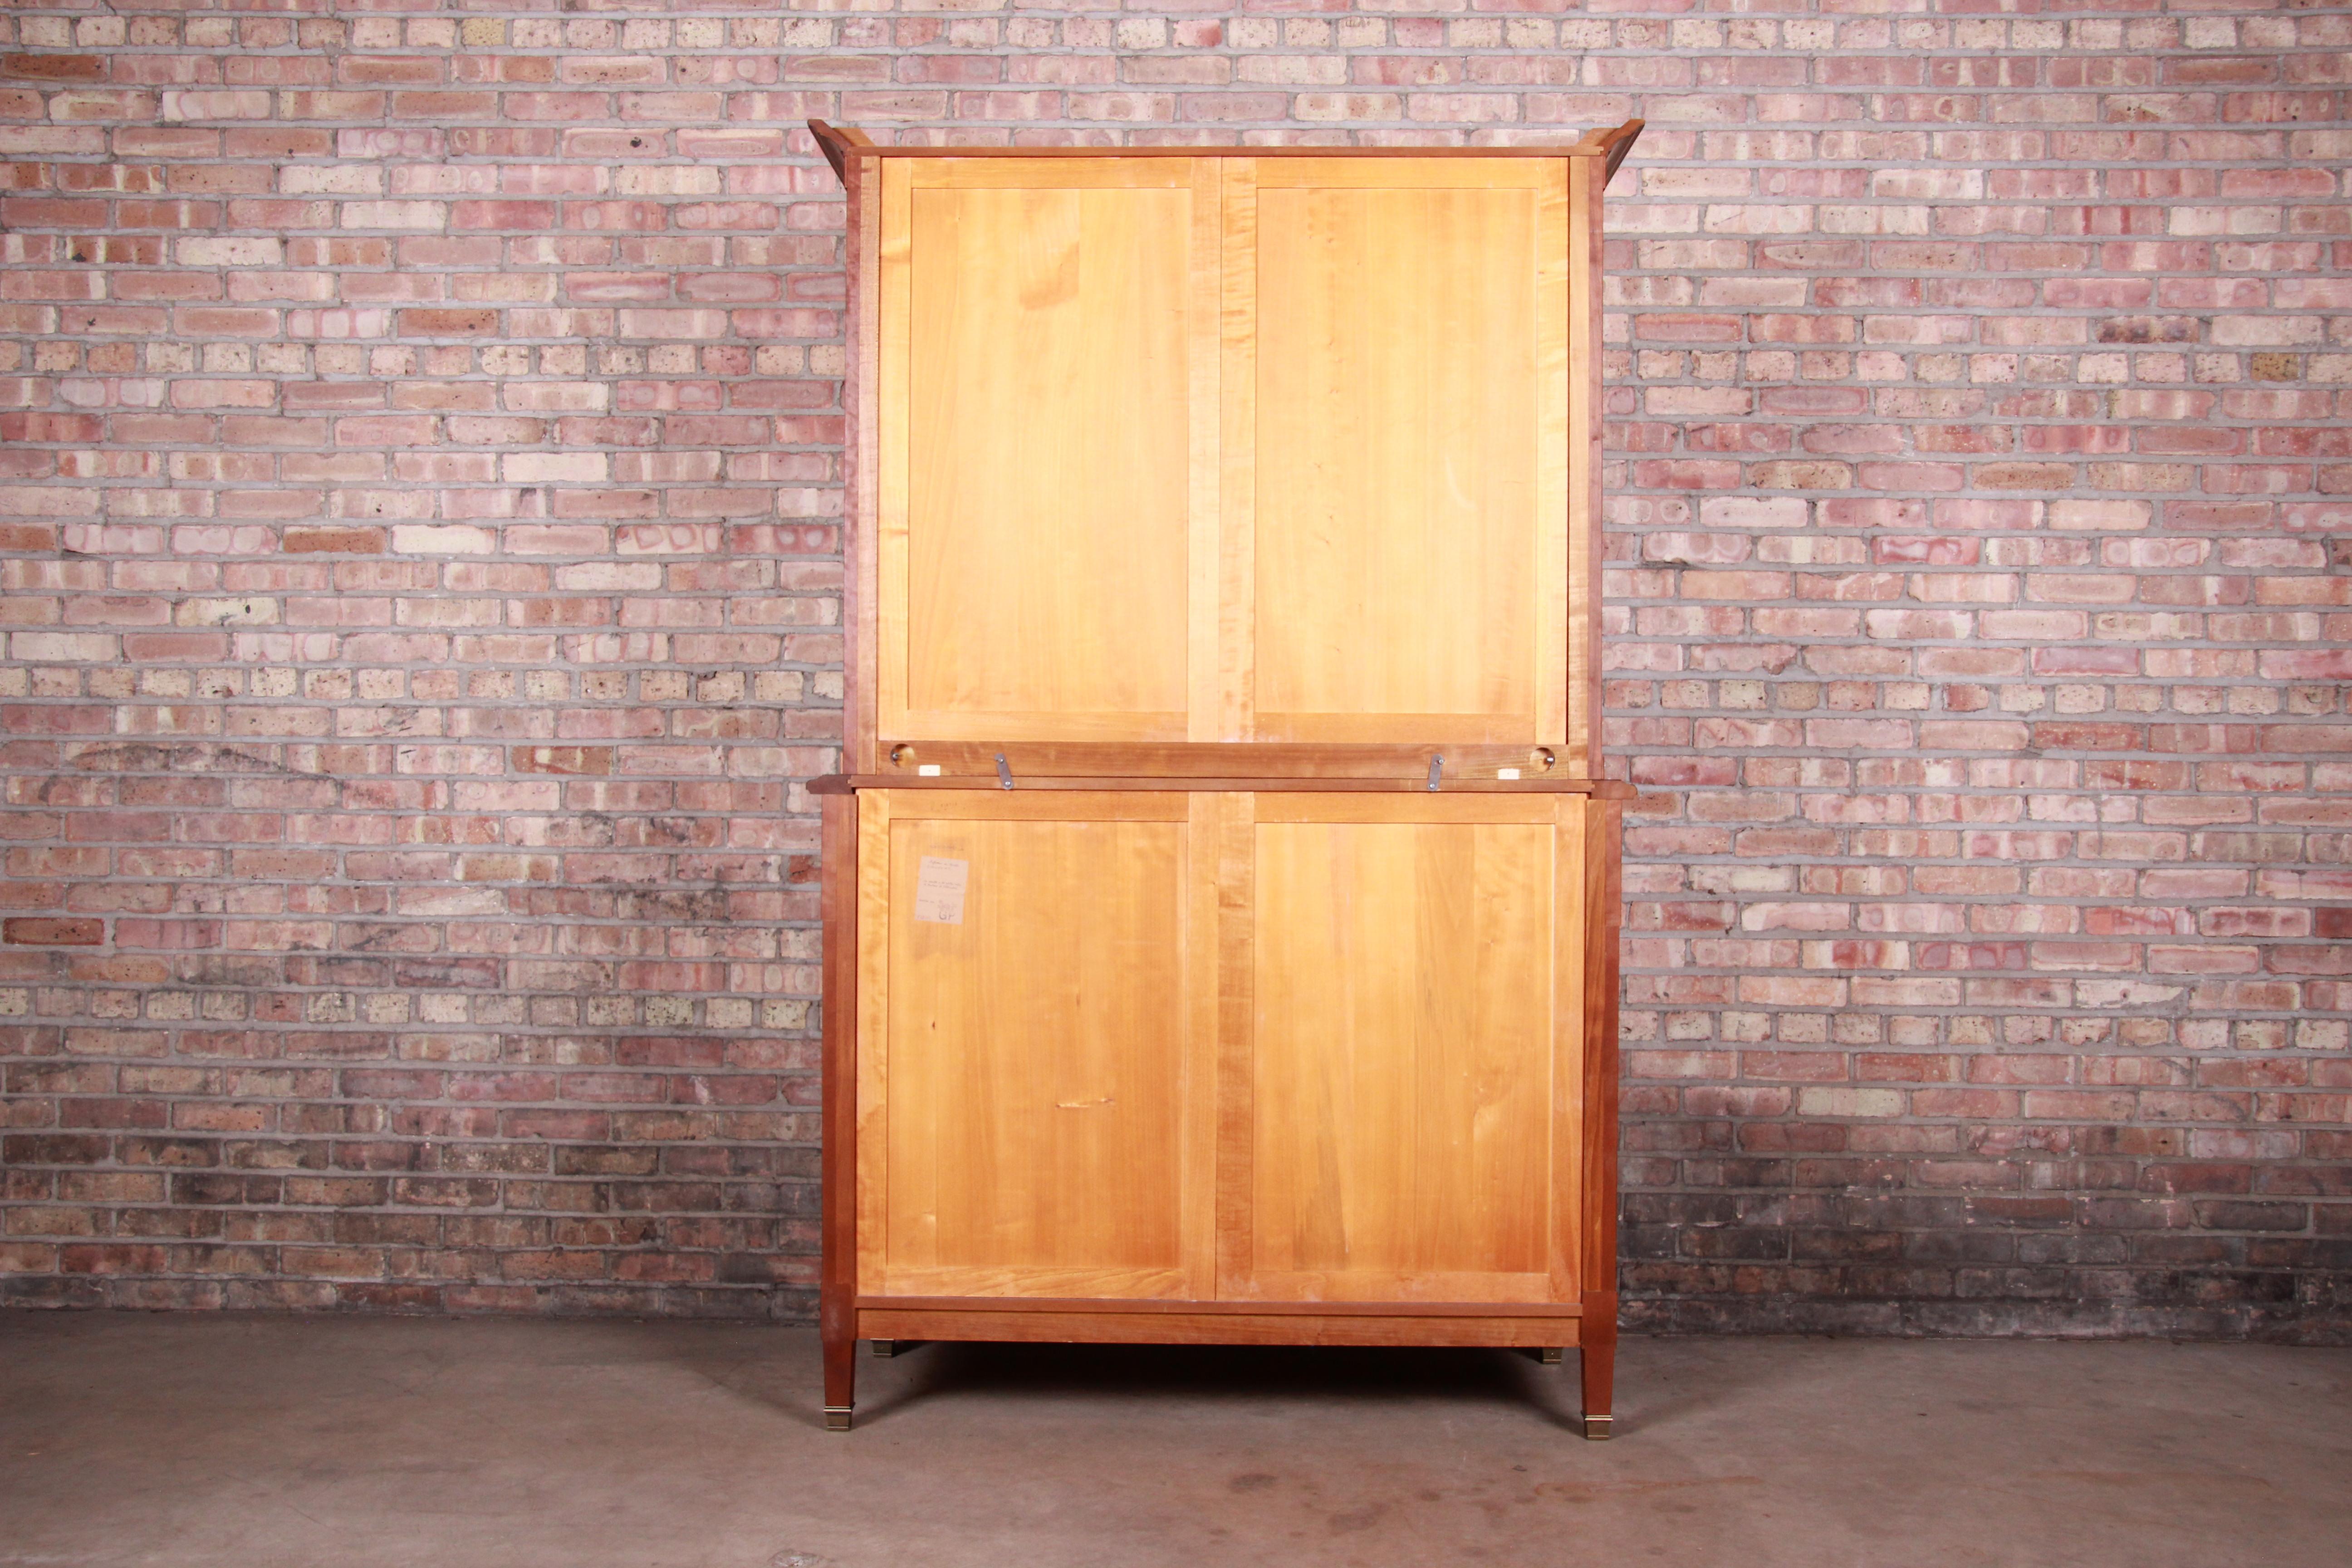 French Provincial Solid Cherry Breakfront Bookcase or Bar Cabinet by Grange 10